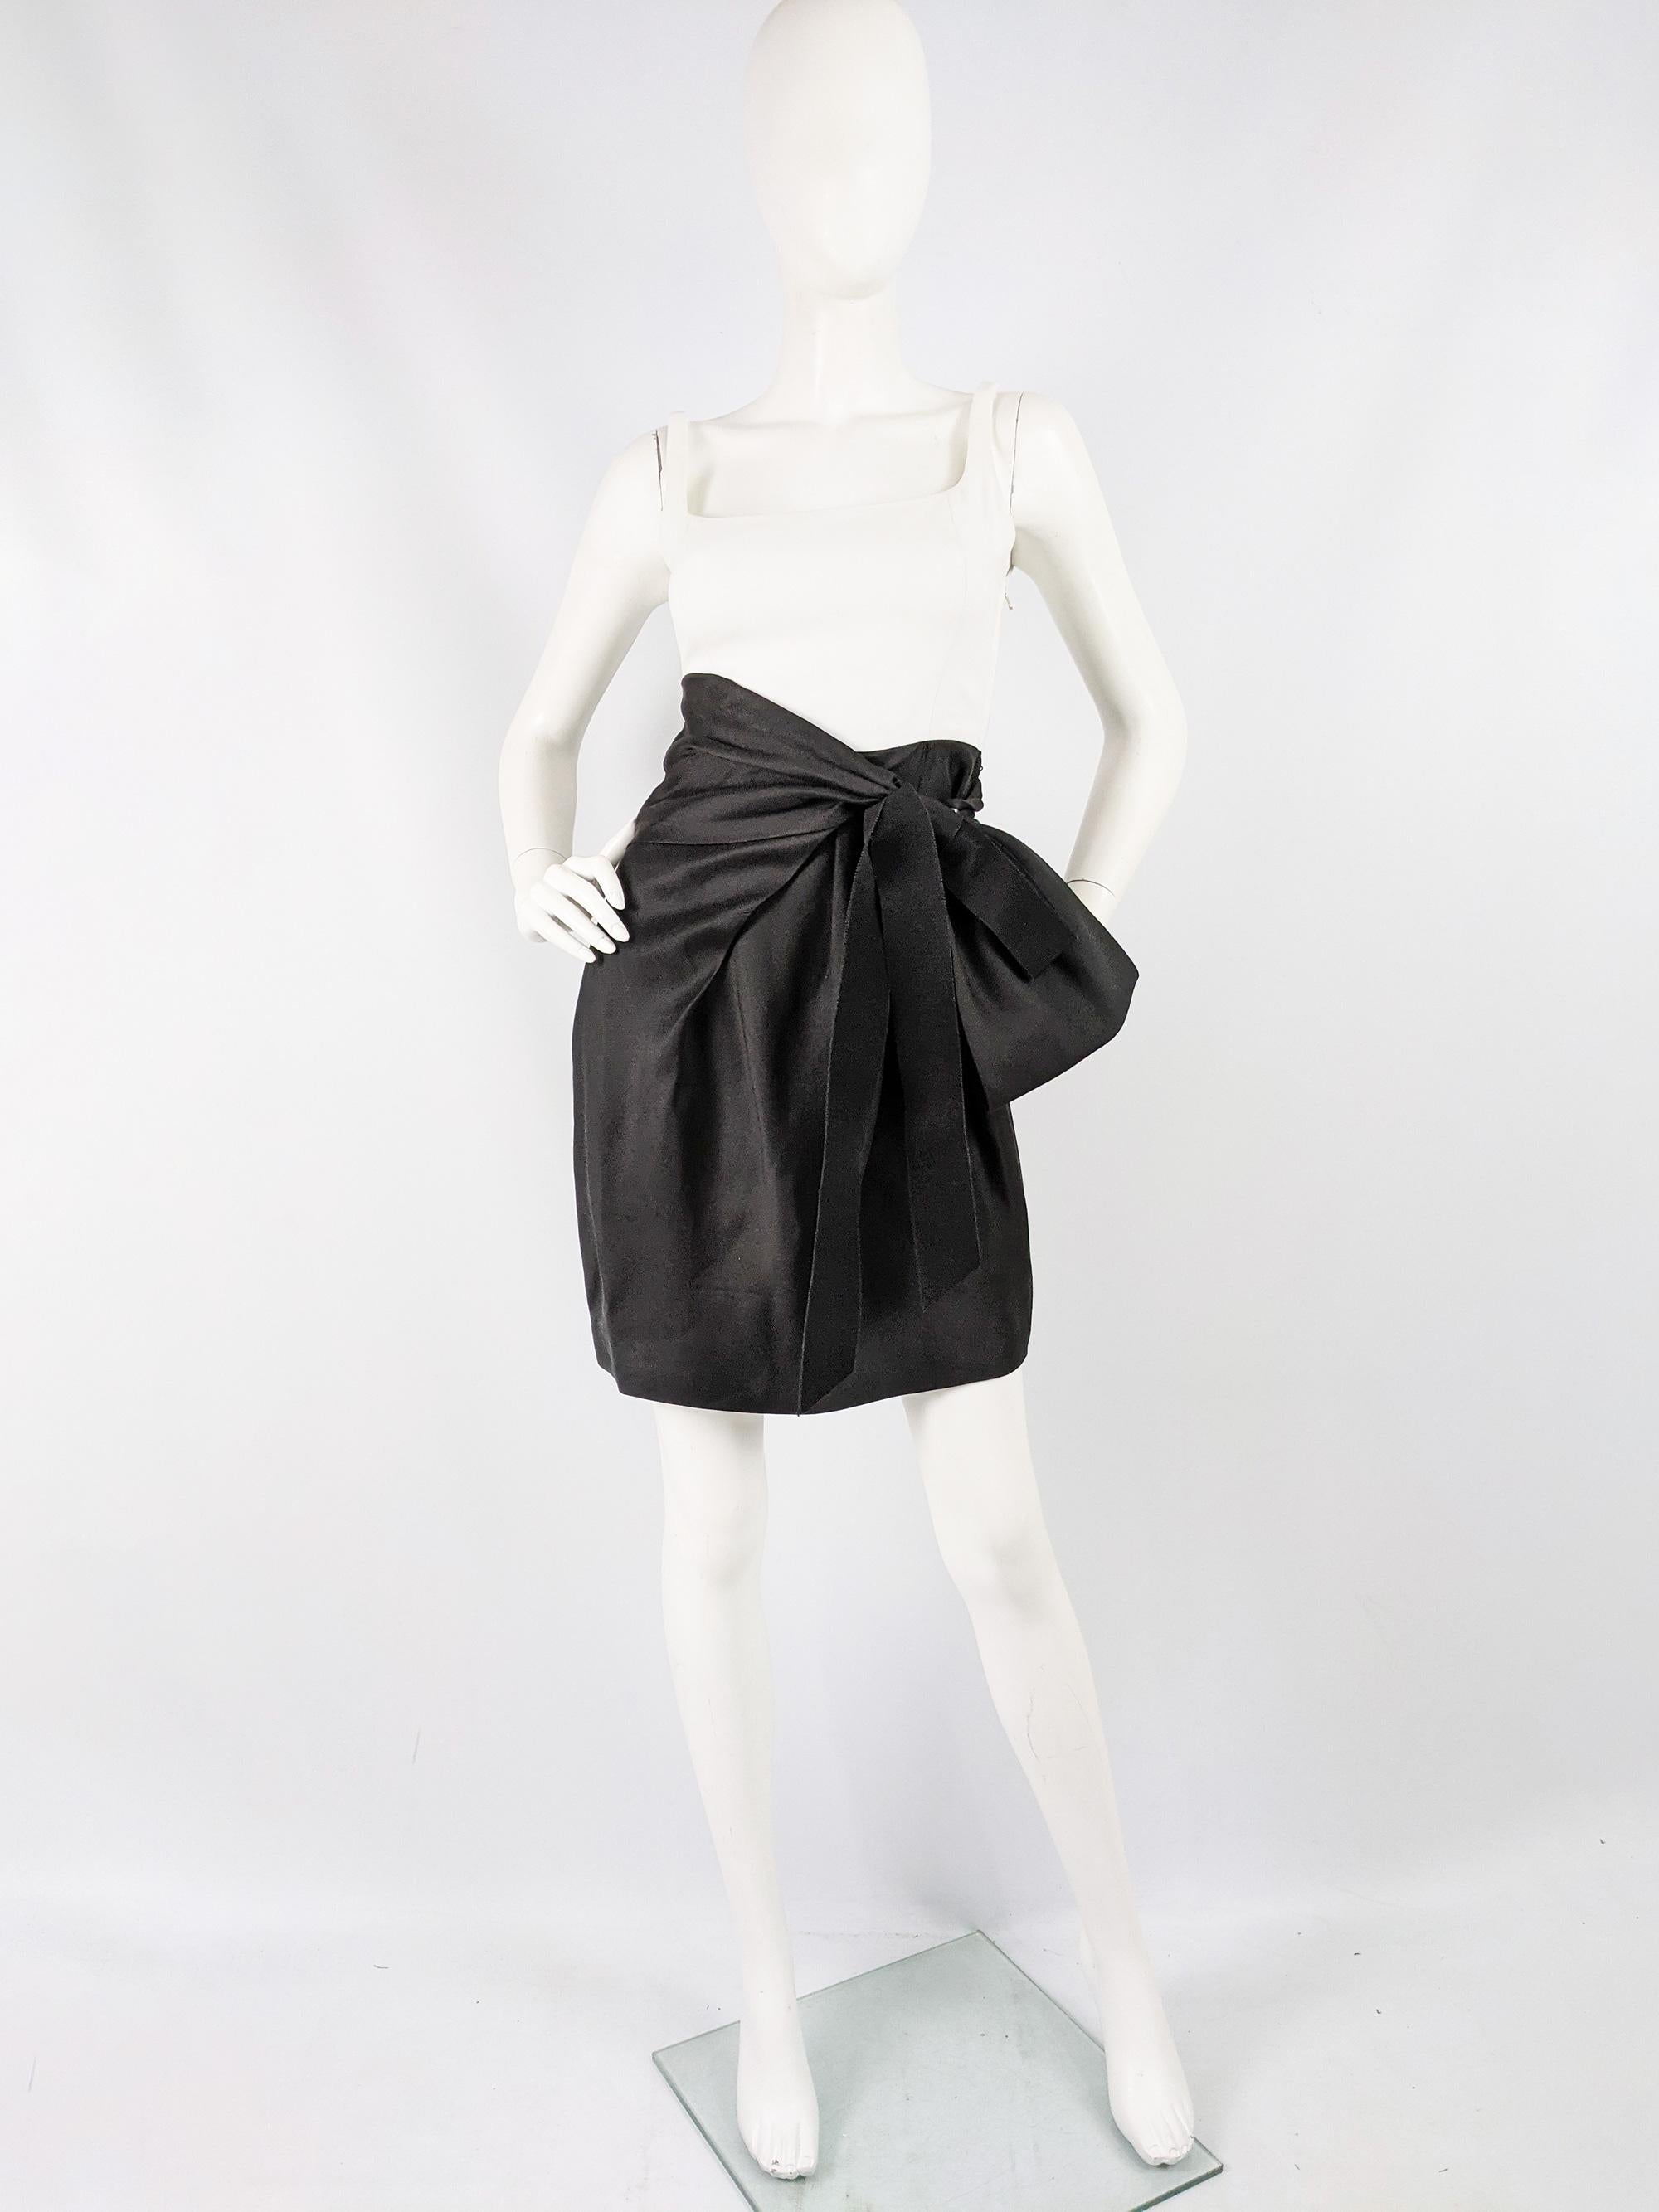 A fabulous womens party dress by Gianfranco Ferre in a white and black silk with a large black bow and pleated skirt. Perfect for a cocktail party or evening event. 

Size: Marked IT 38 which equates to a UK 6/ US 2/ EU 34. 
Bust - 32” / 81cm
Waist